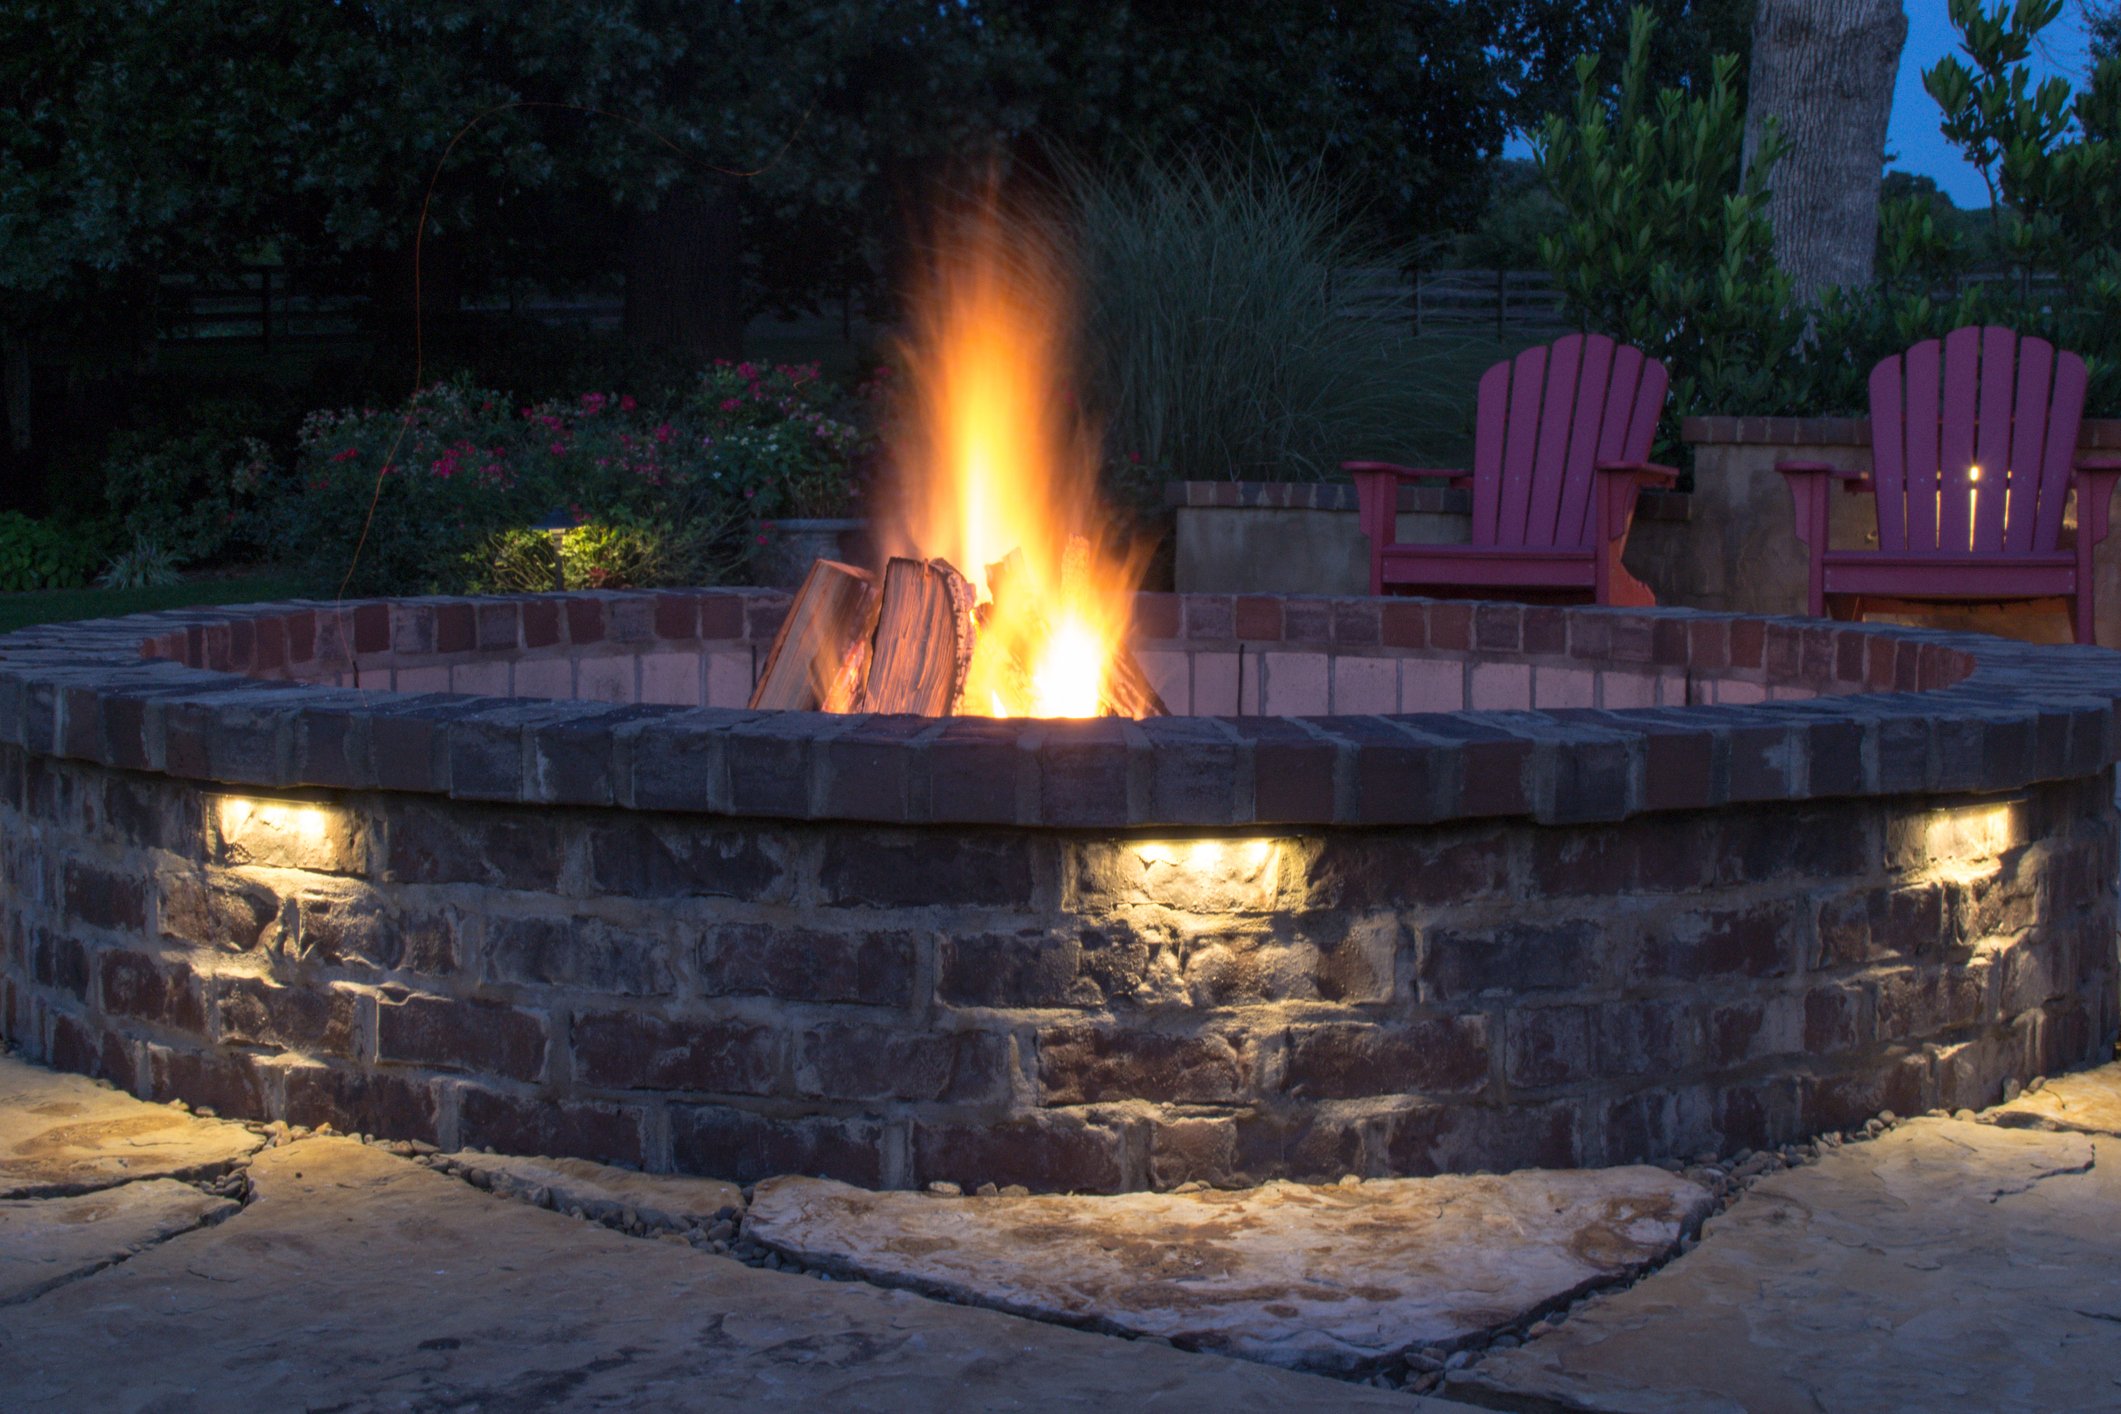 Brick Pavers You Need For A Firepit, How Many Pavers Do I Need For A Round Fire Pit